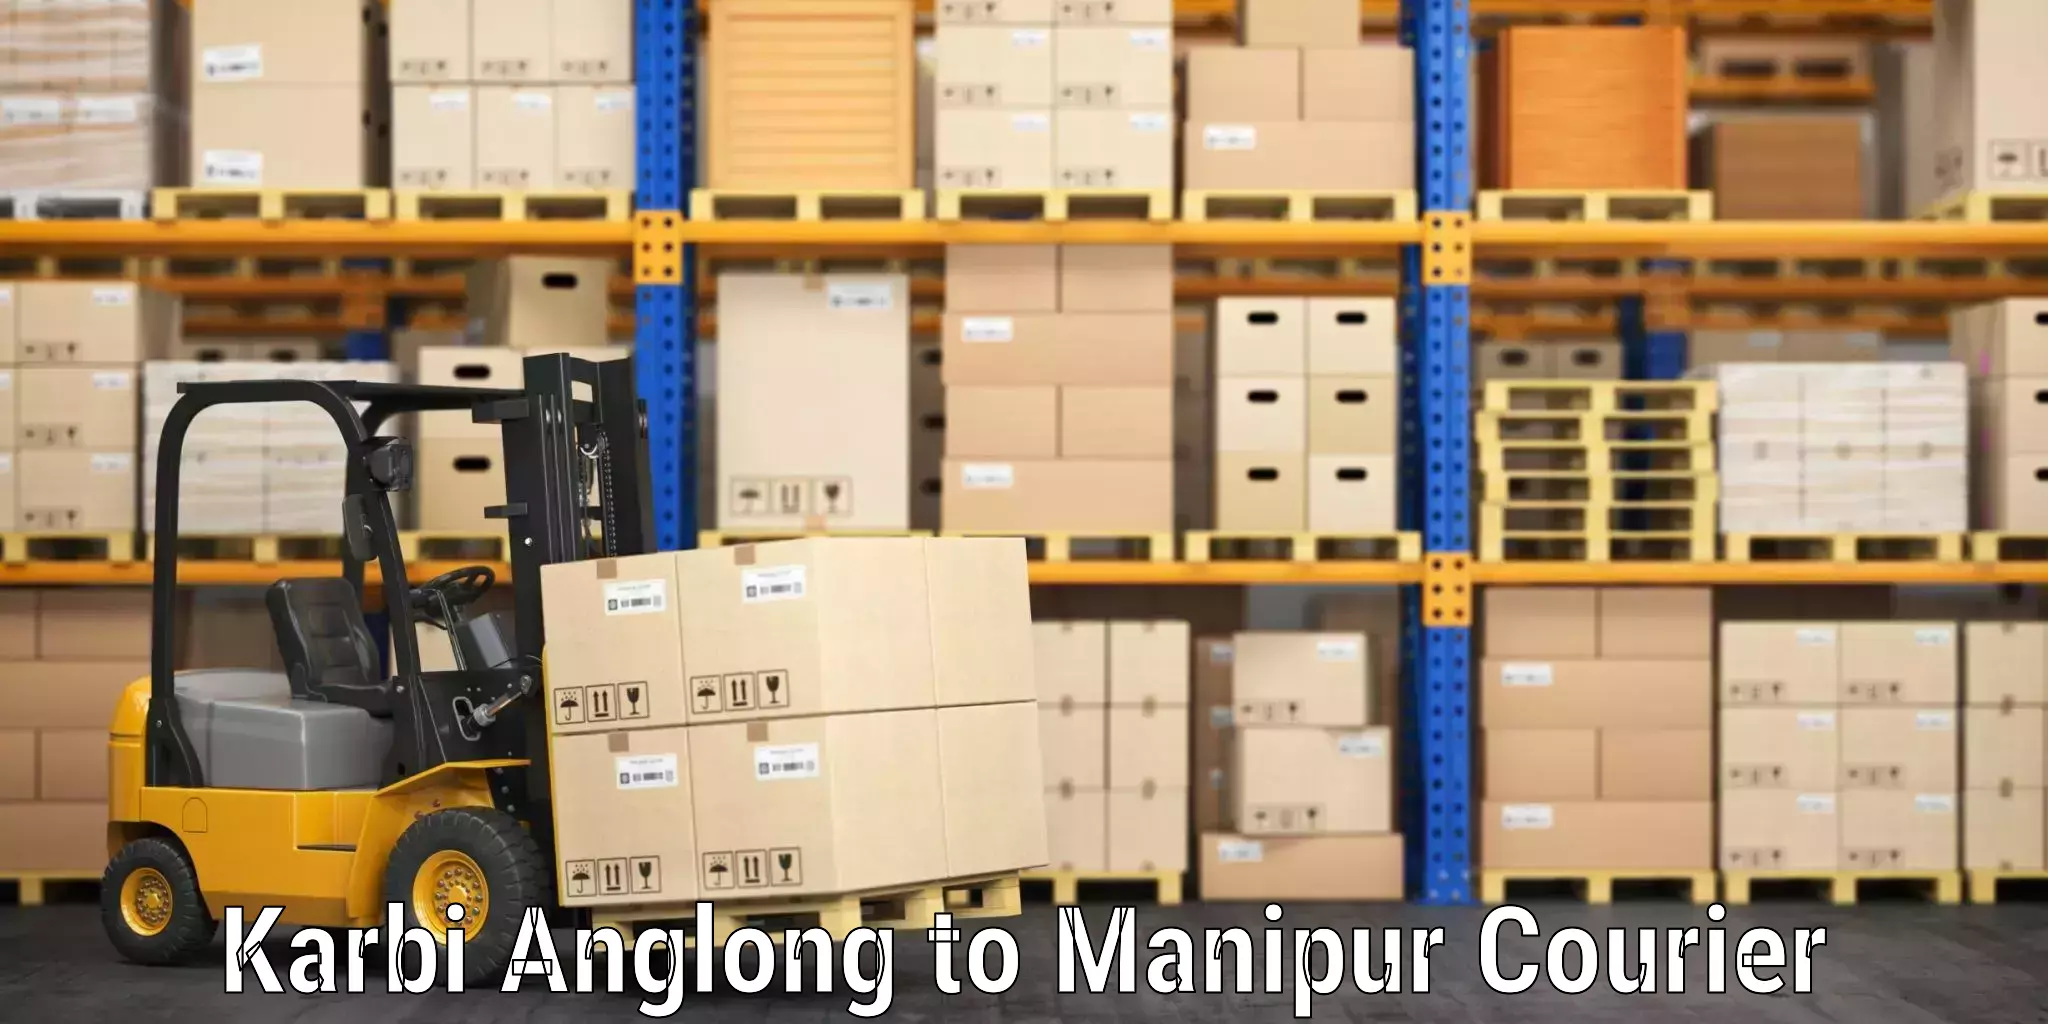 Luggage shipment processing in Karbi Anglong to Manipur